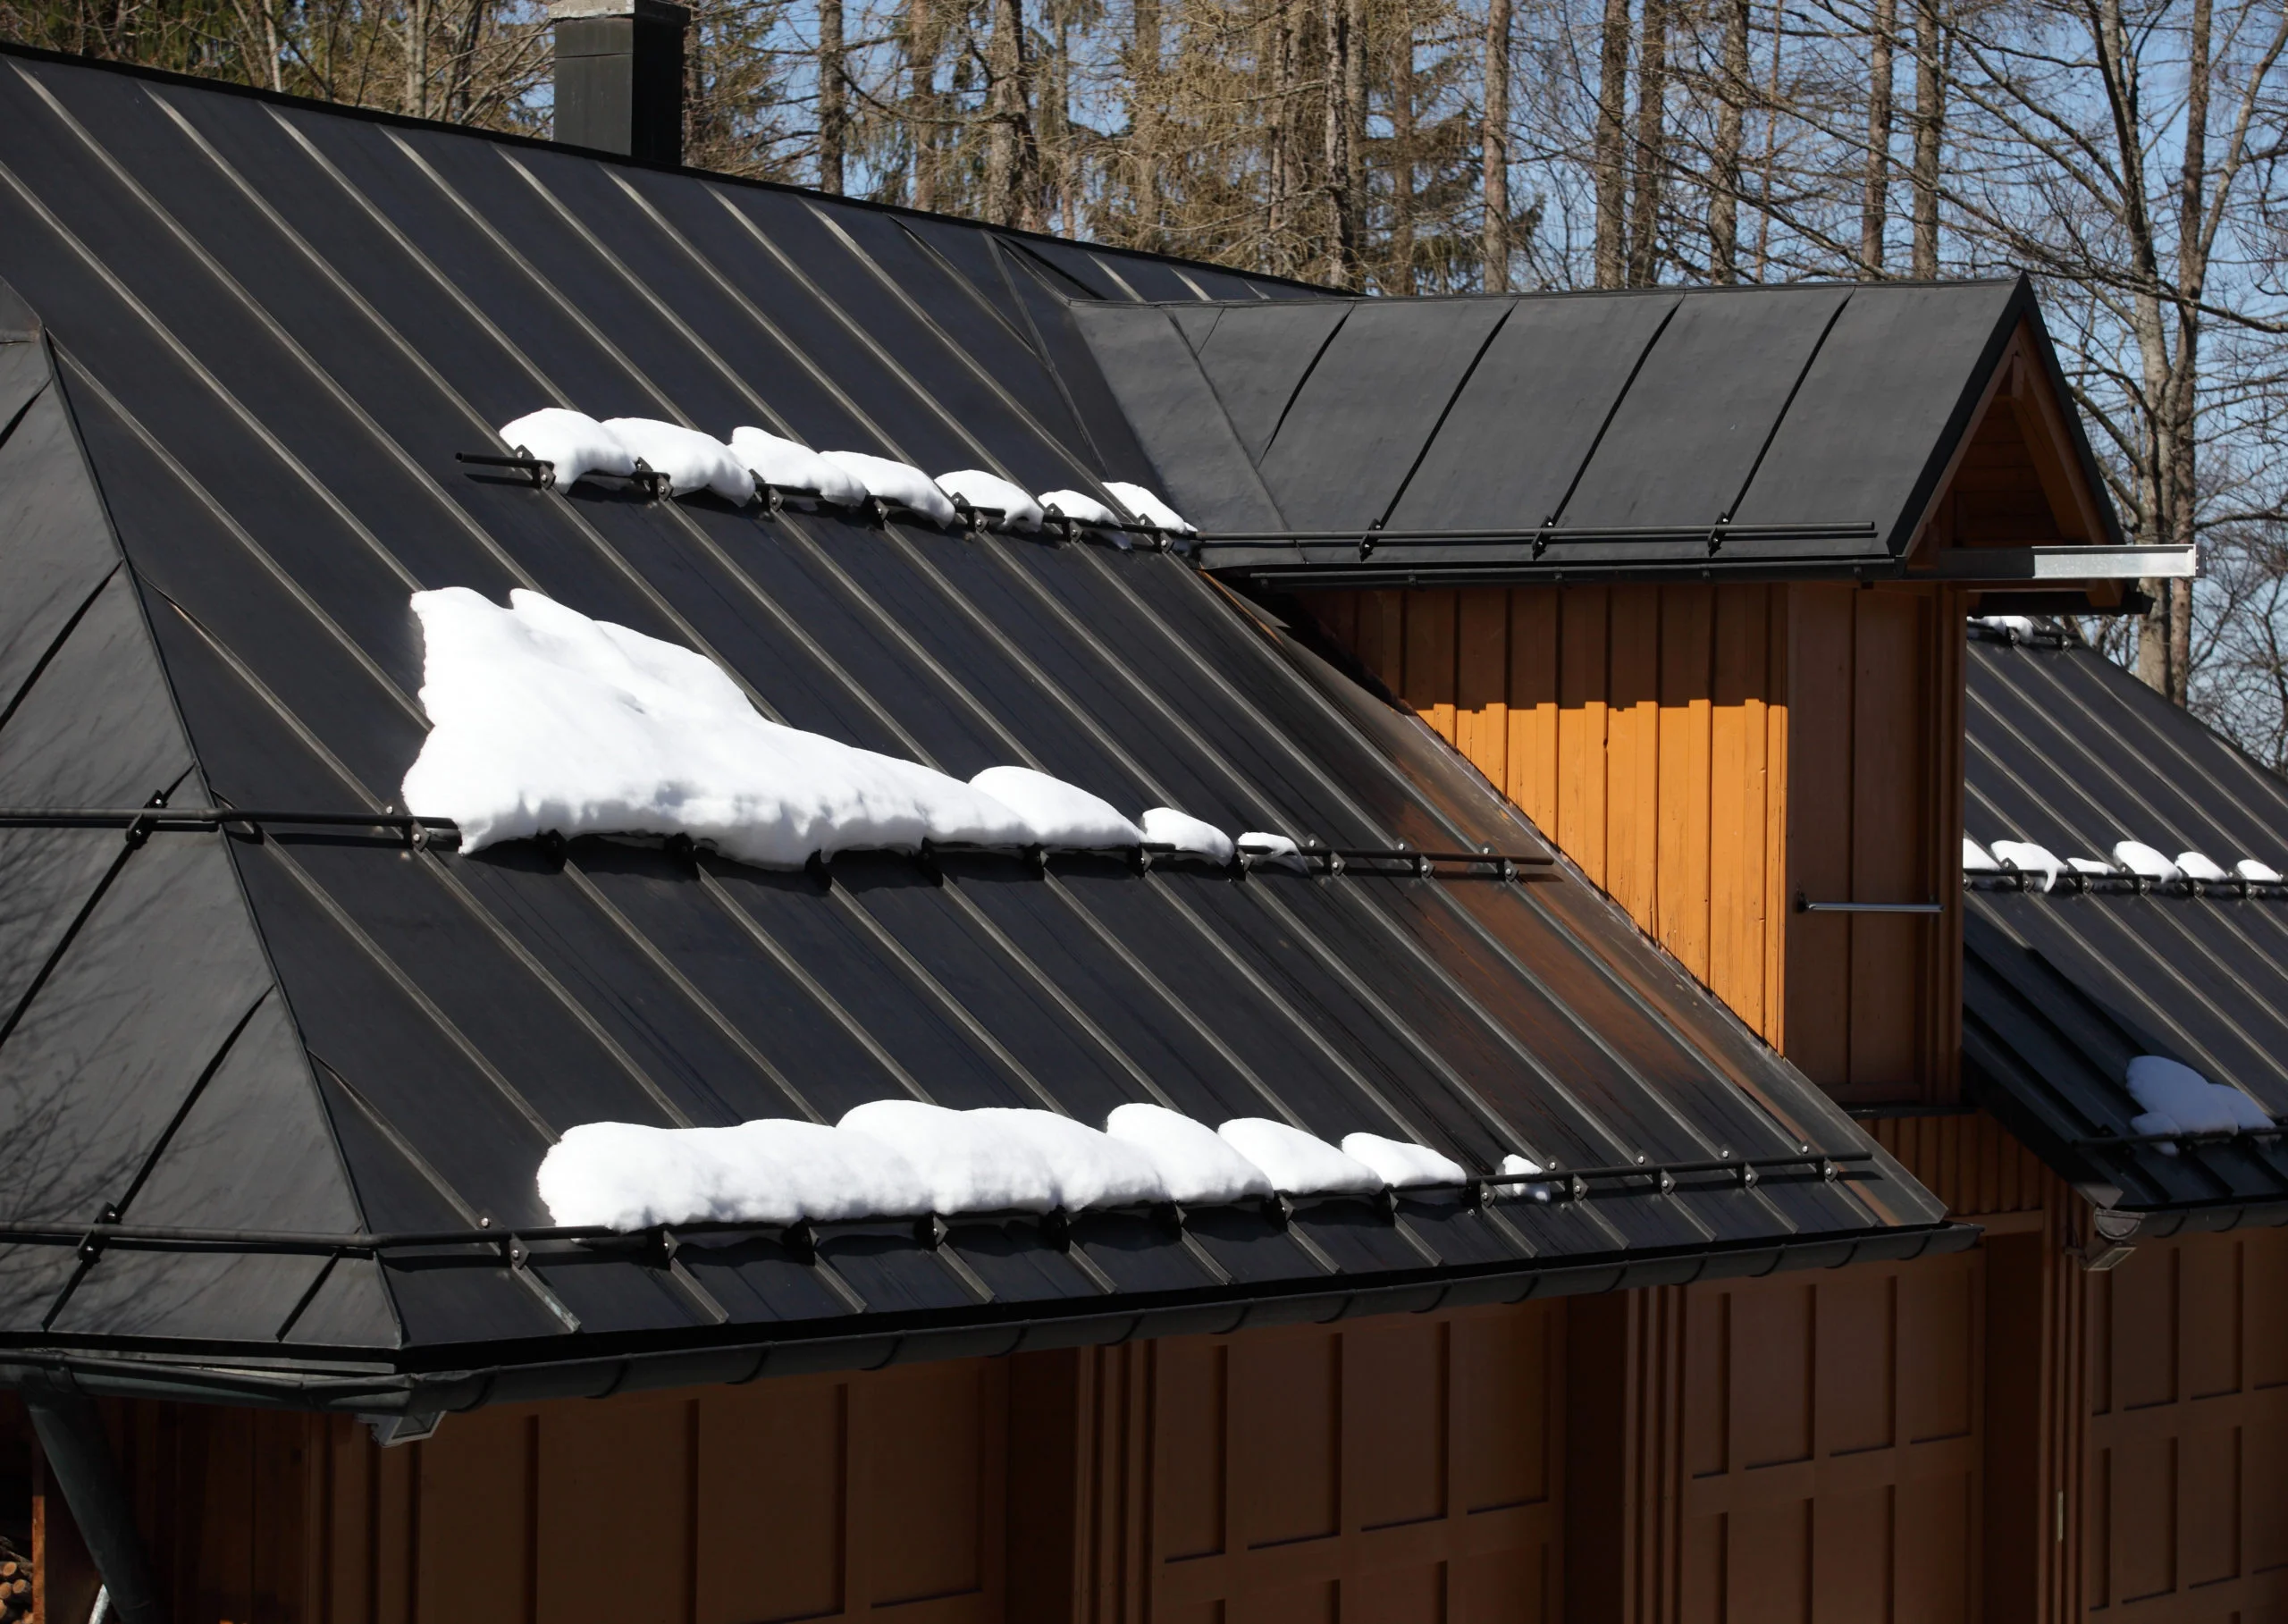 Do Ice Dams Form on Metal Roofs? Exploring Winter Roofing Challenges and Solutions